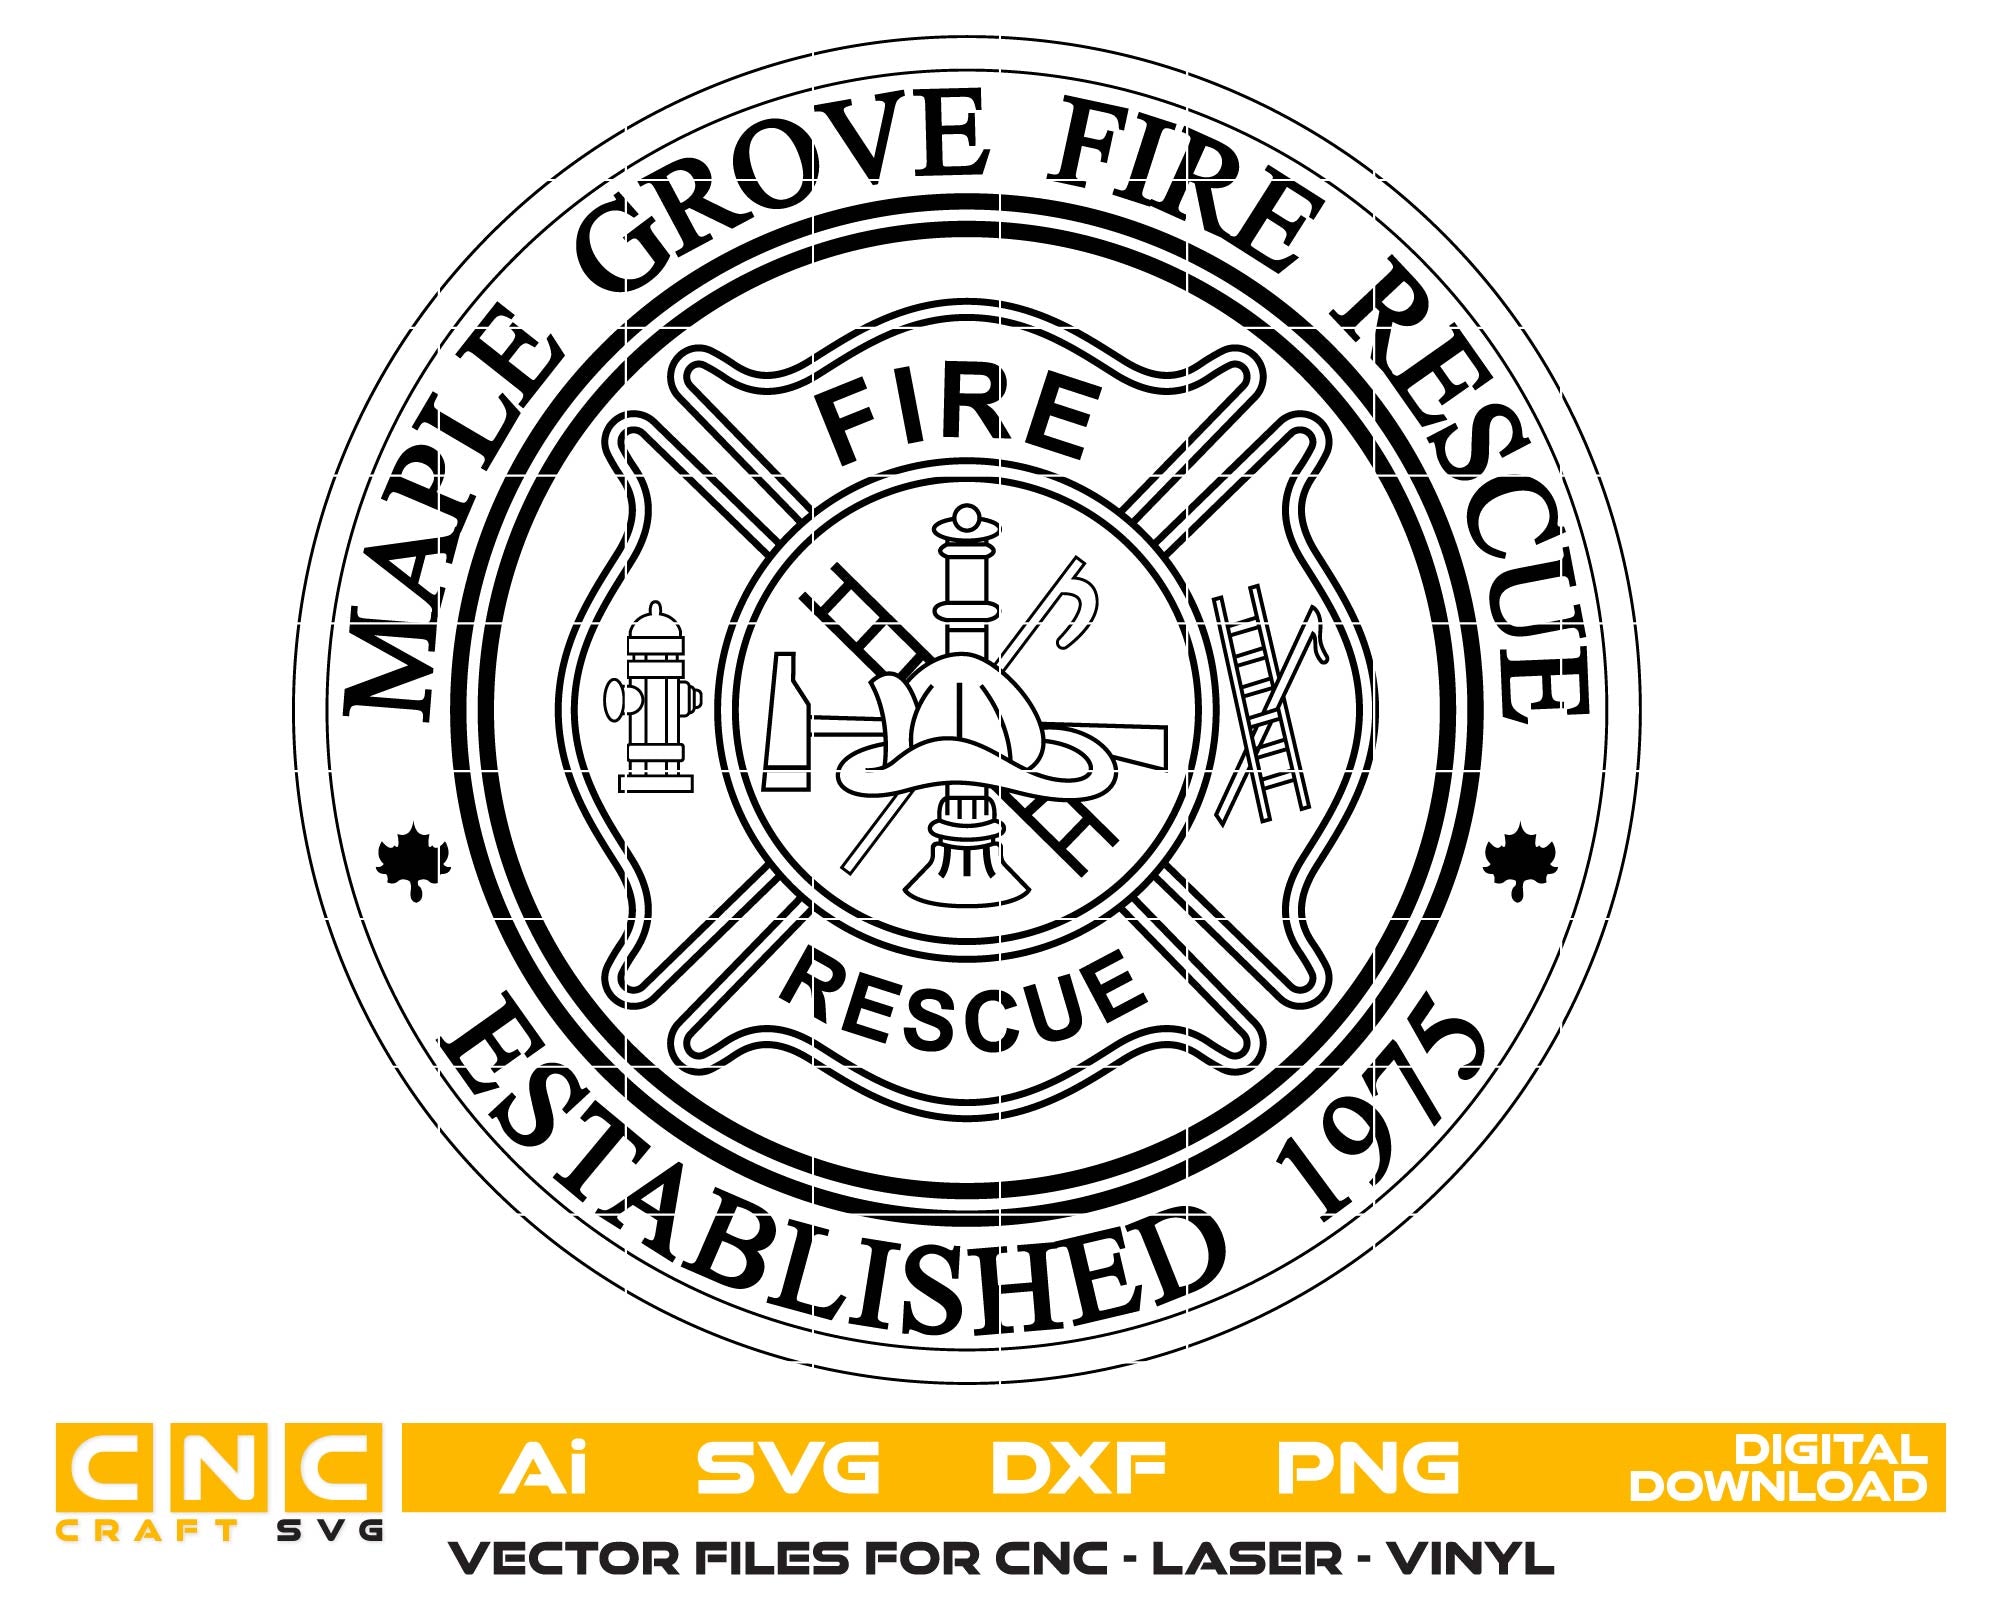 Maple Grove Fire Rescue Vector Art, Ai,SVG, DXF, PNG, Digital Files